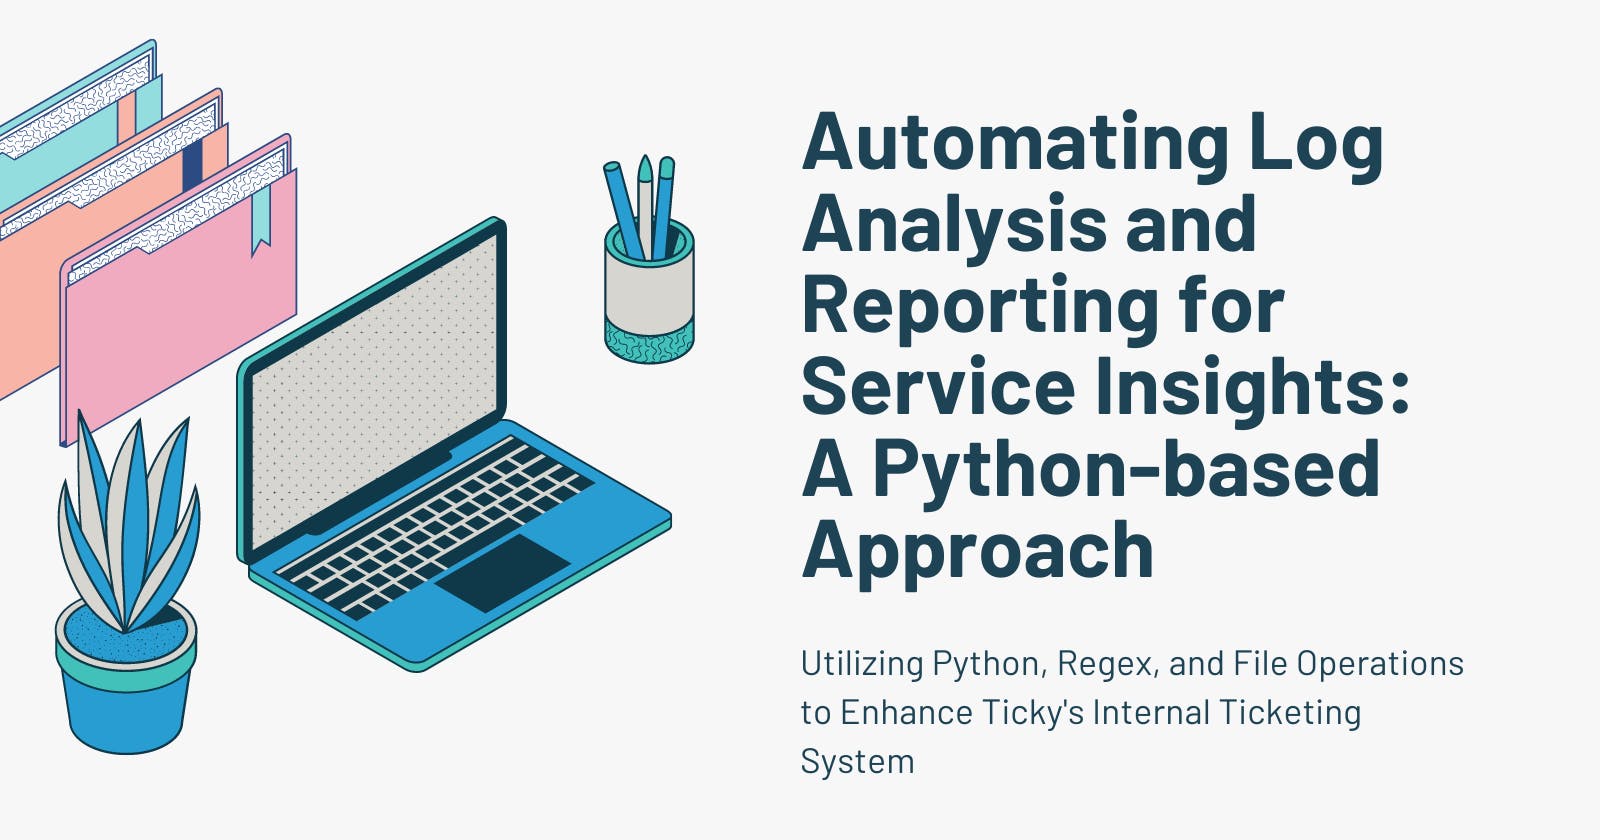 Automating Log Analysis and Reporting for Service Insights: A Python-based Approach